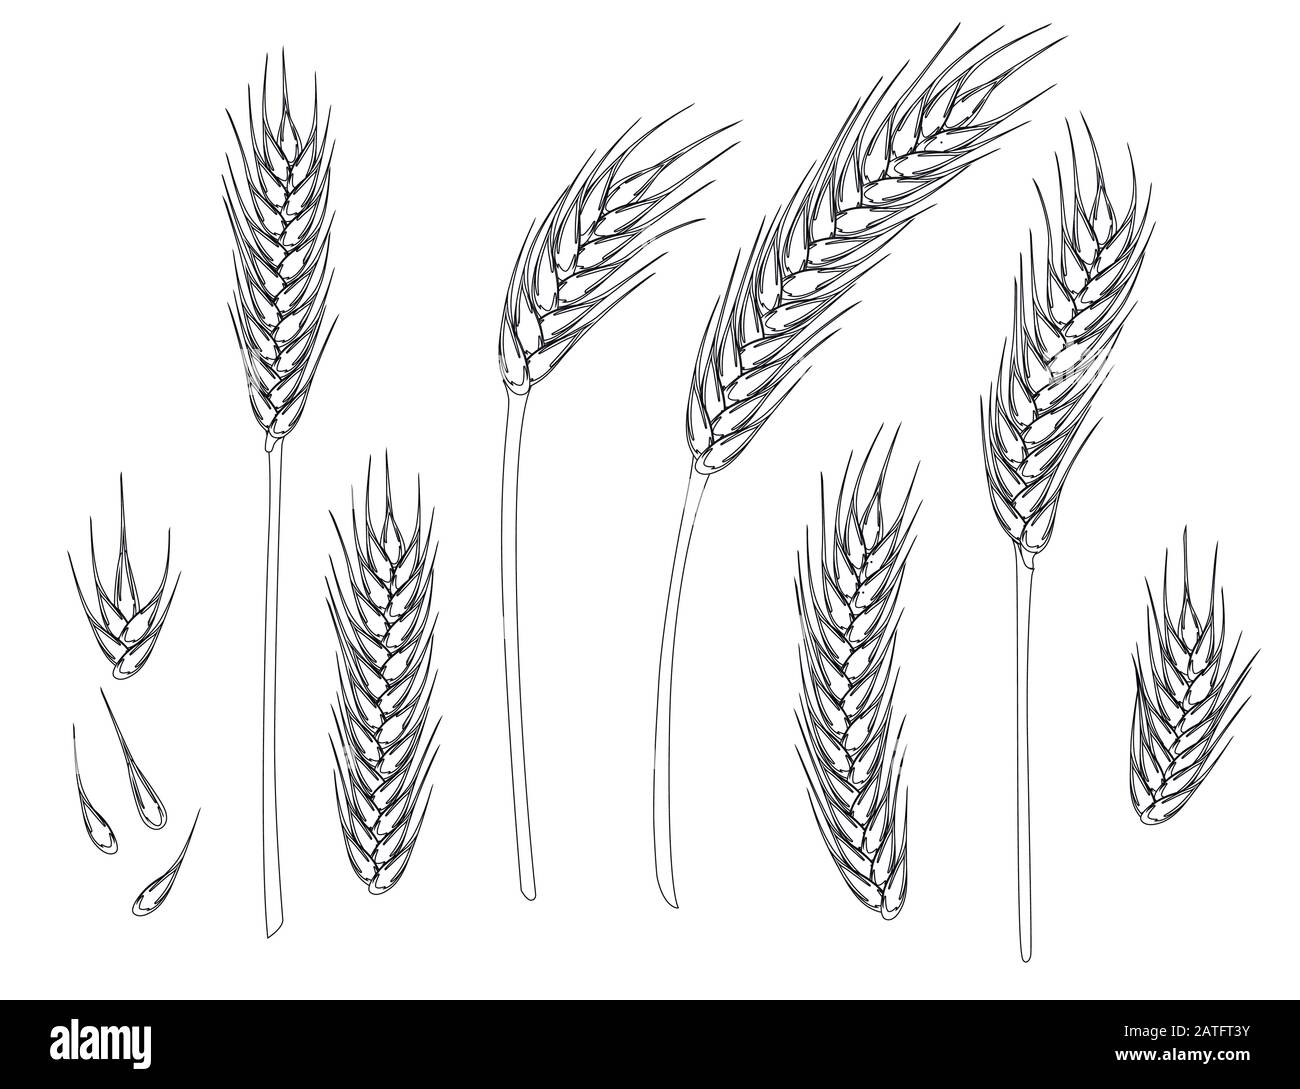 Set of wheat ripe spikelets and grains of wheat flat vector illustration isolated on white background outline style Stock Vector